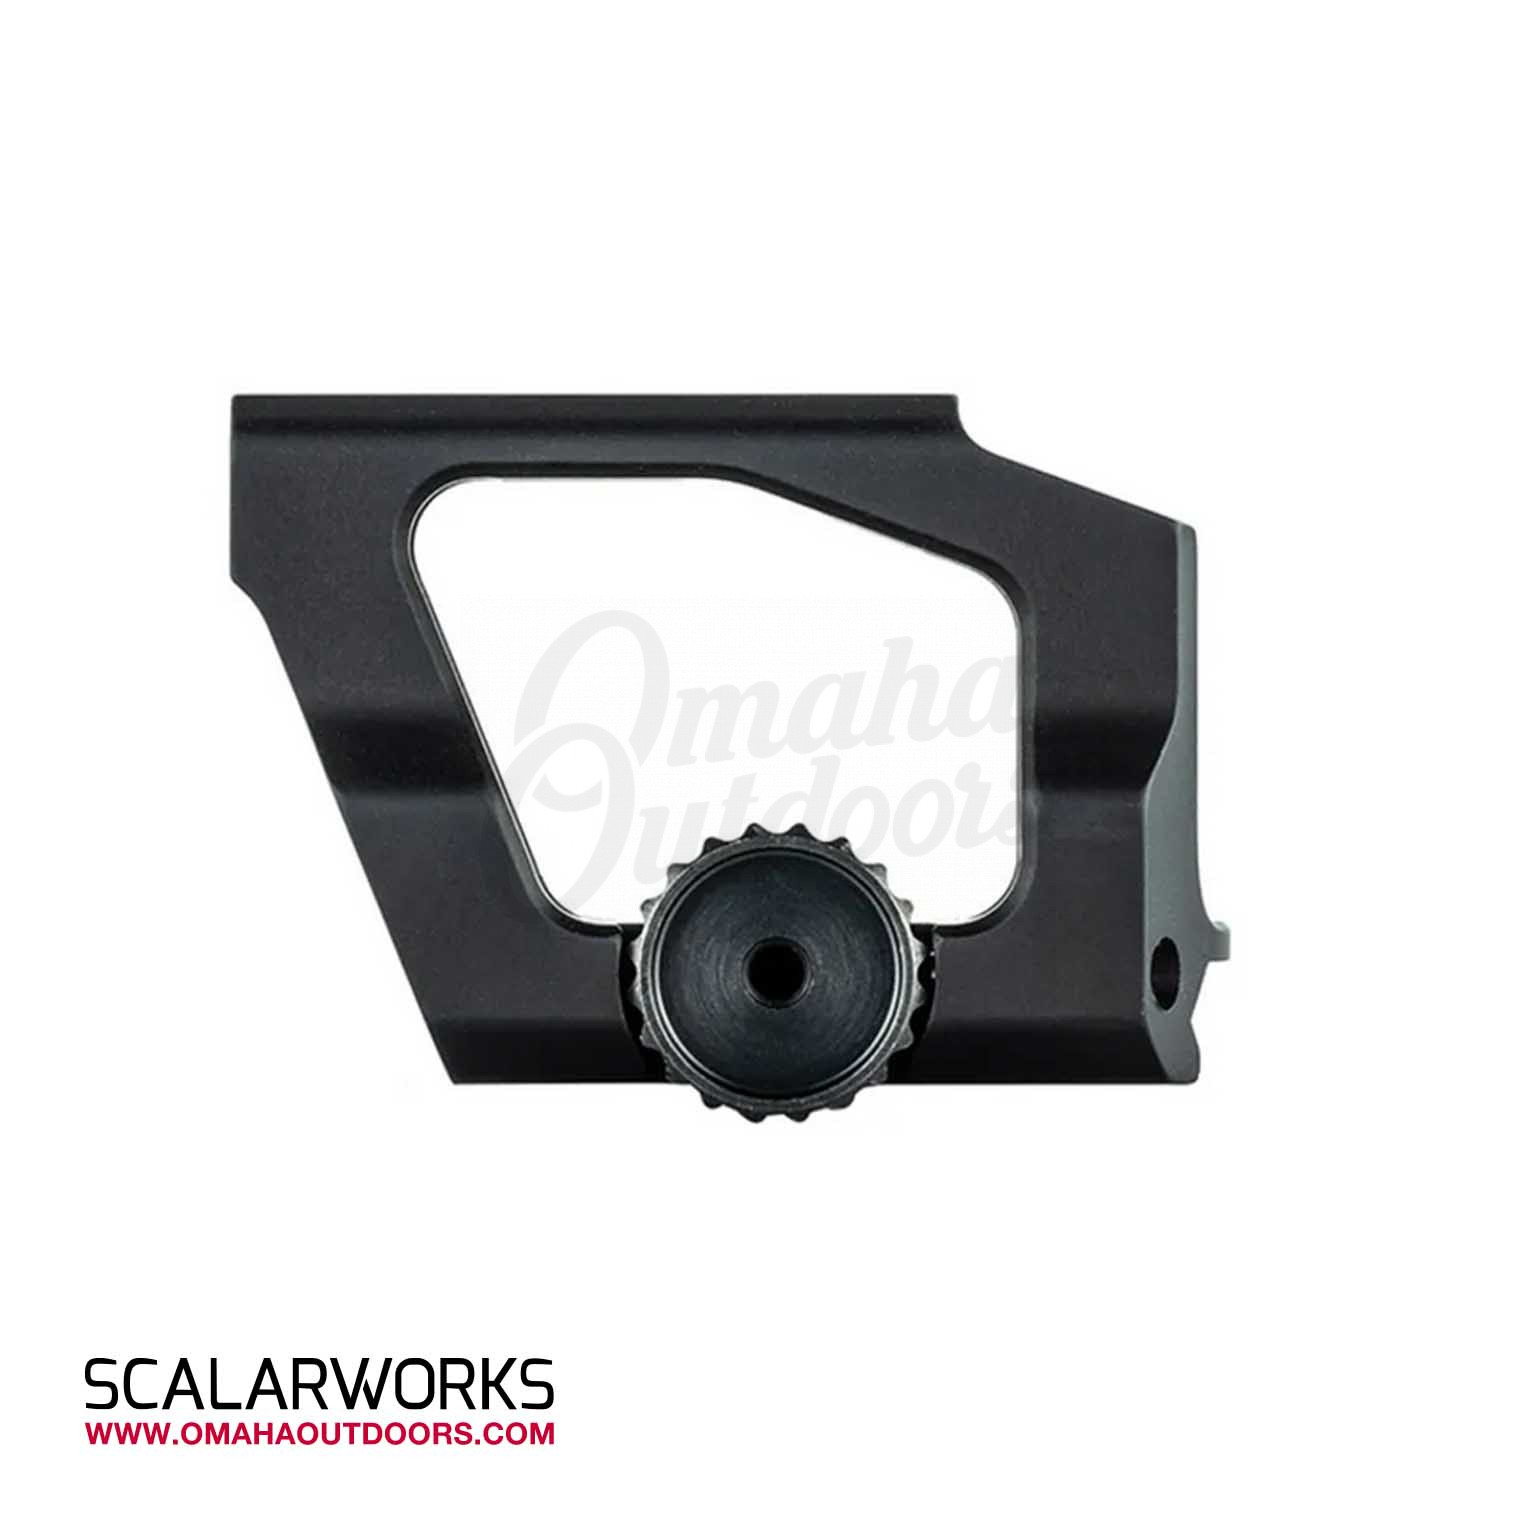 SCALARWORKS LEAP 05 Trijicon MRO Mount 1.93 - Primary Weapons Systems